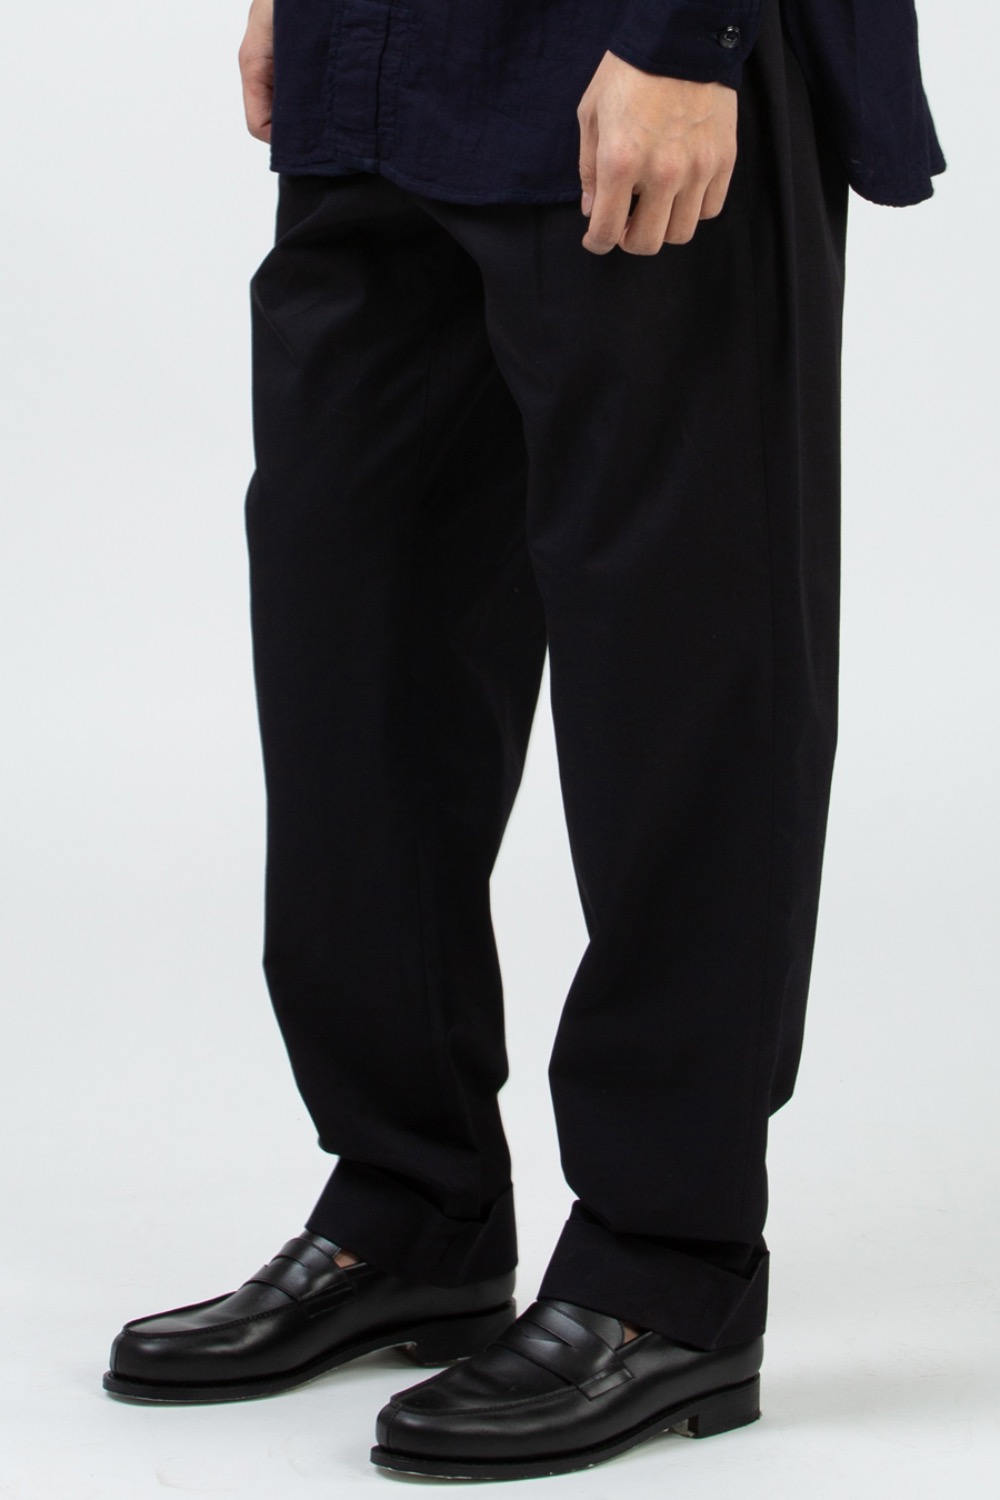 ANDOVER PANT BLACK HIGHCOUNT TWILL